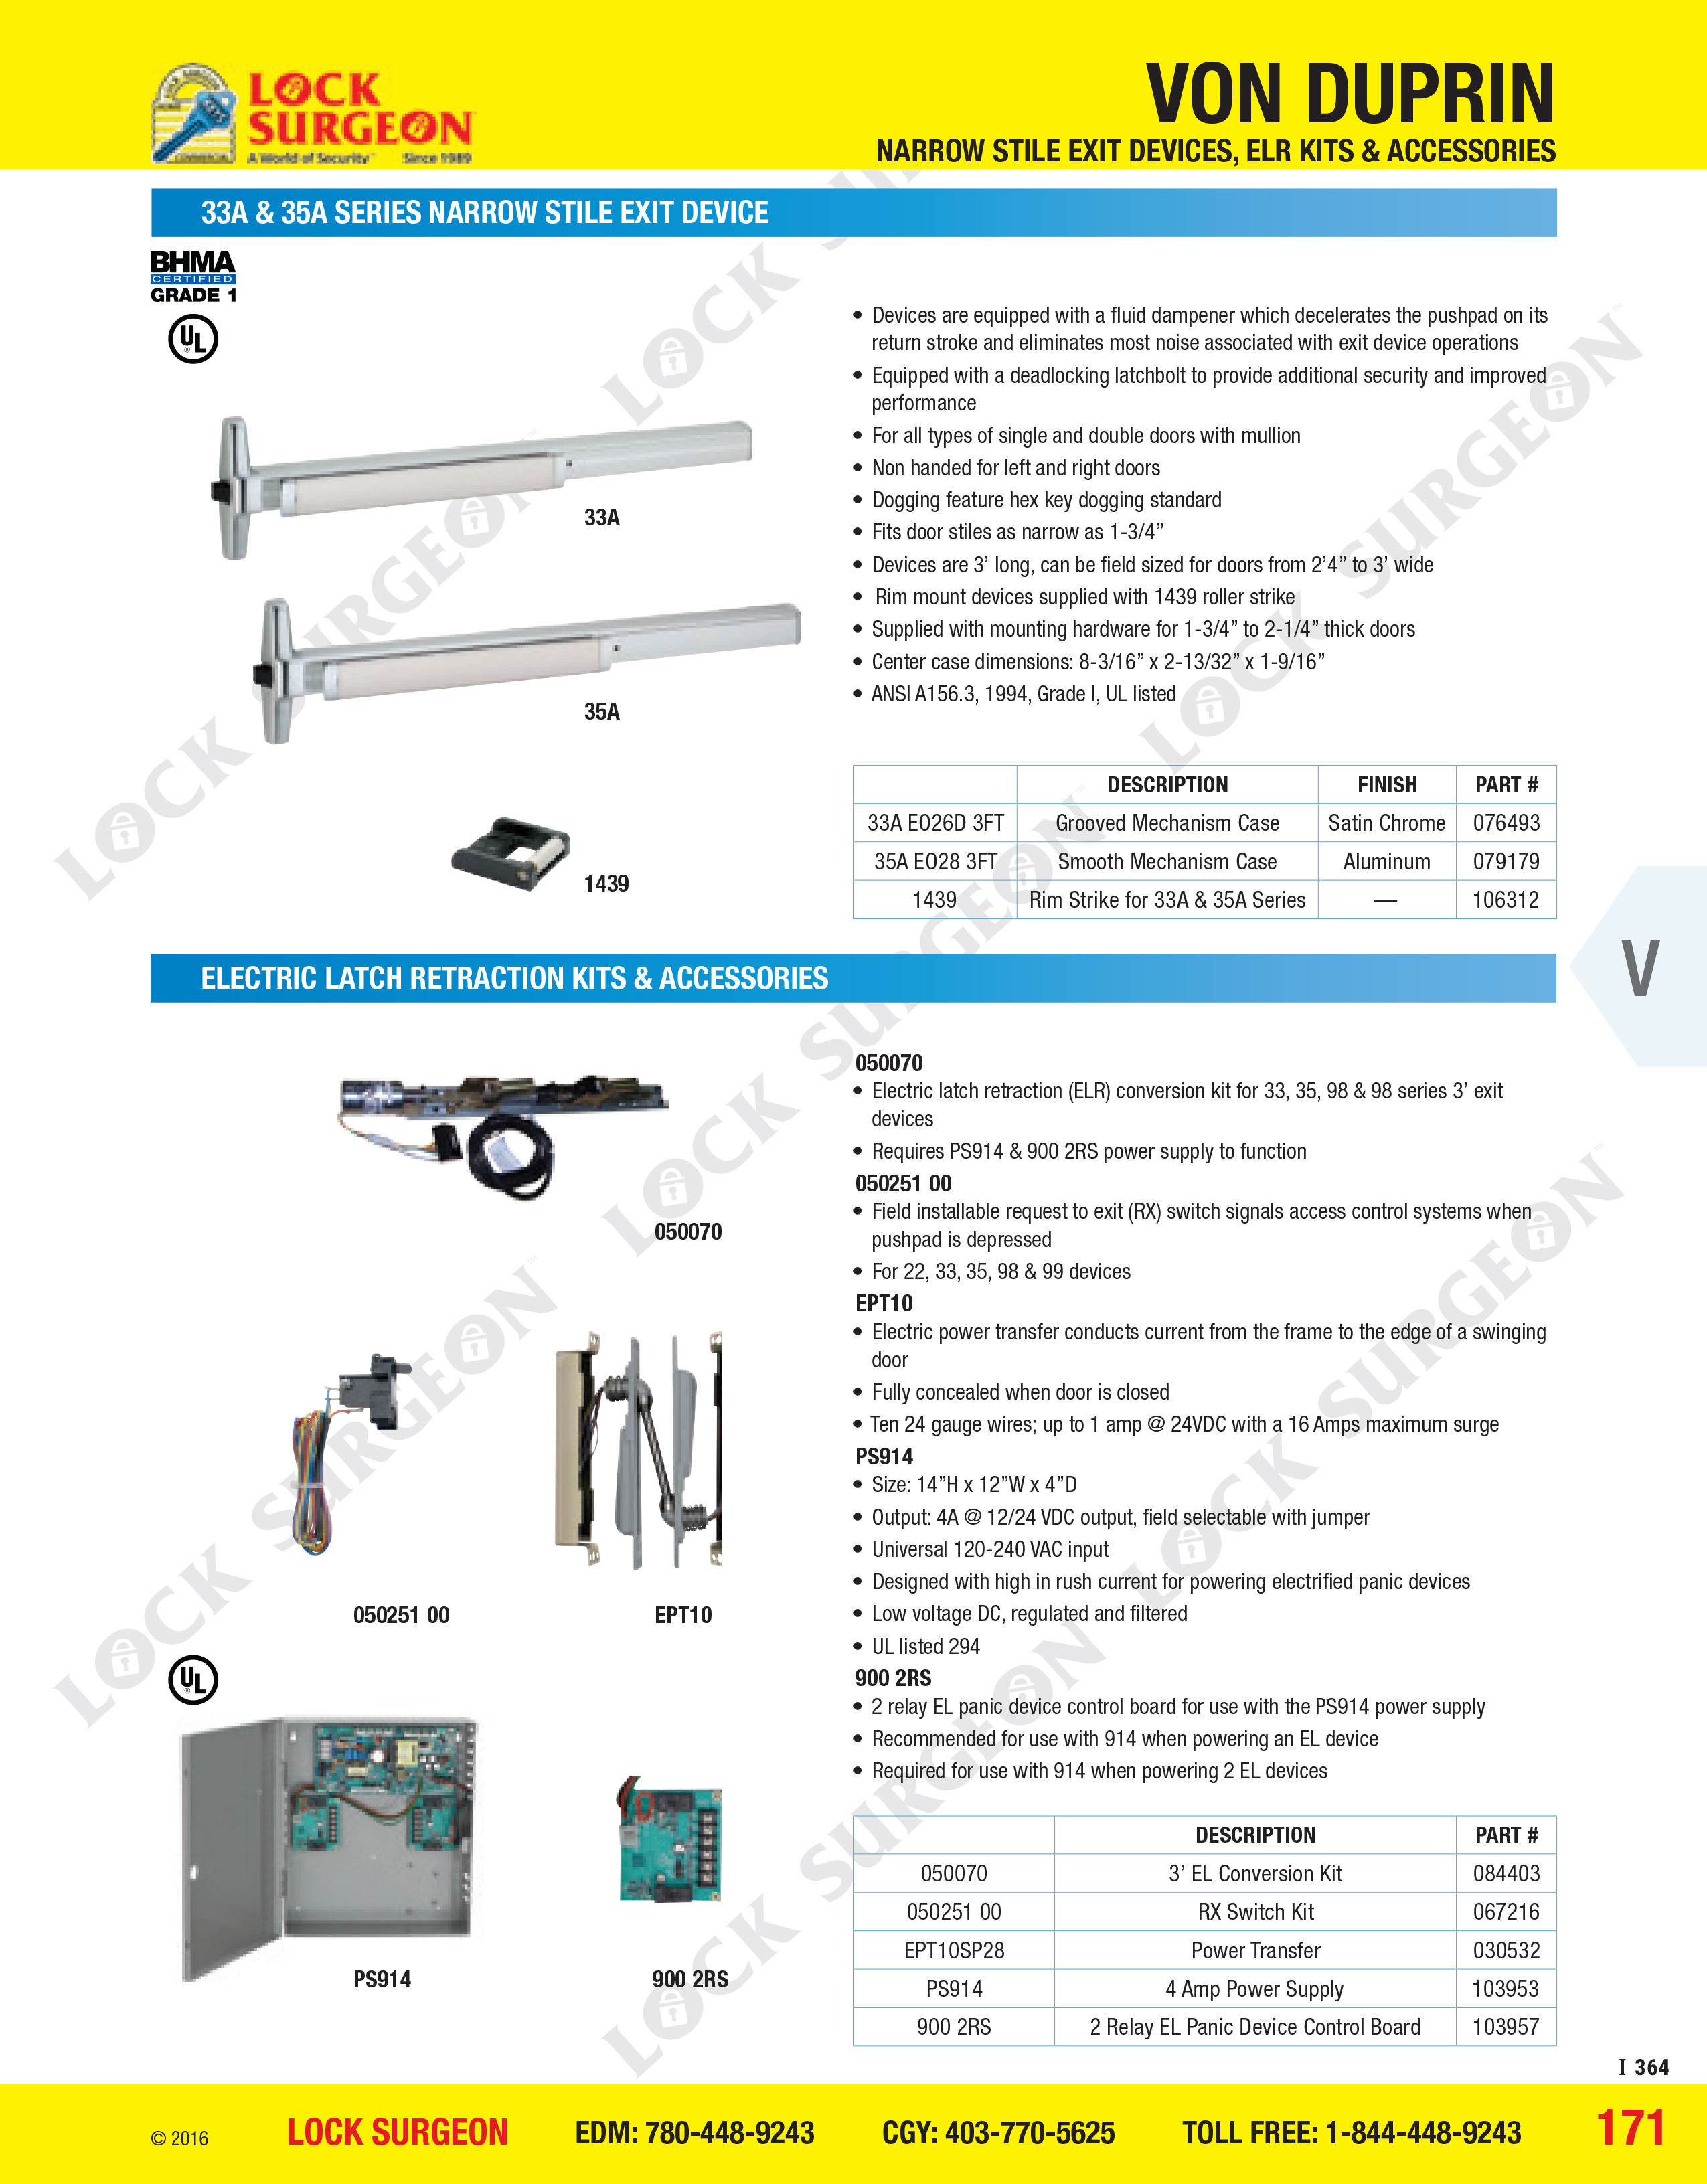 Von Duprin Narrow Stile Exit Devices, Electronic Latch Retraction Kits and Accessories